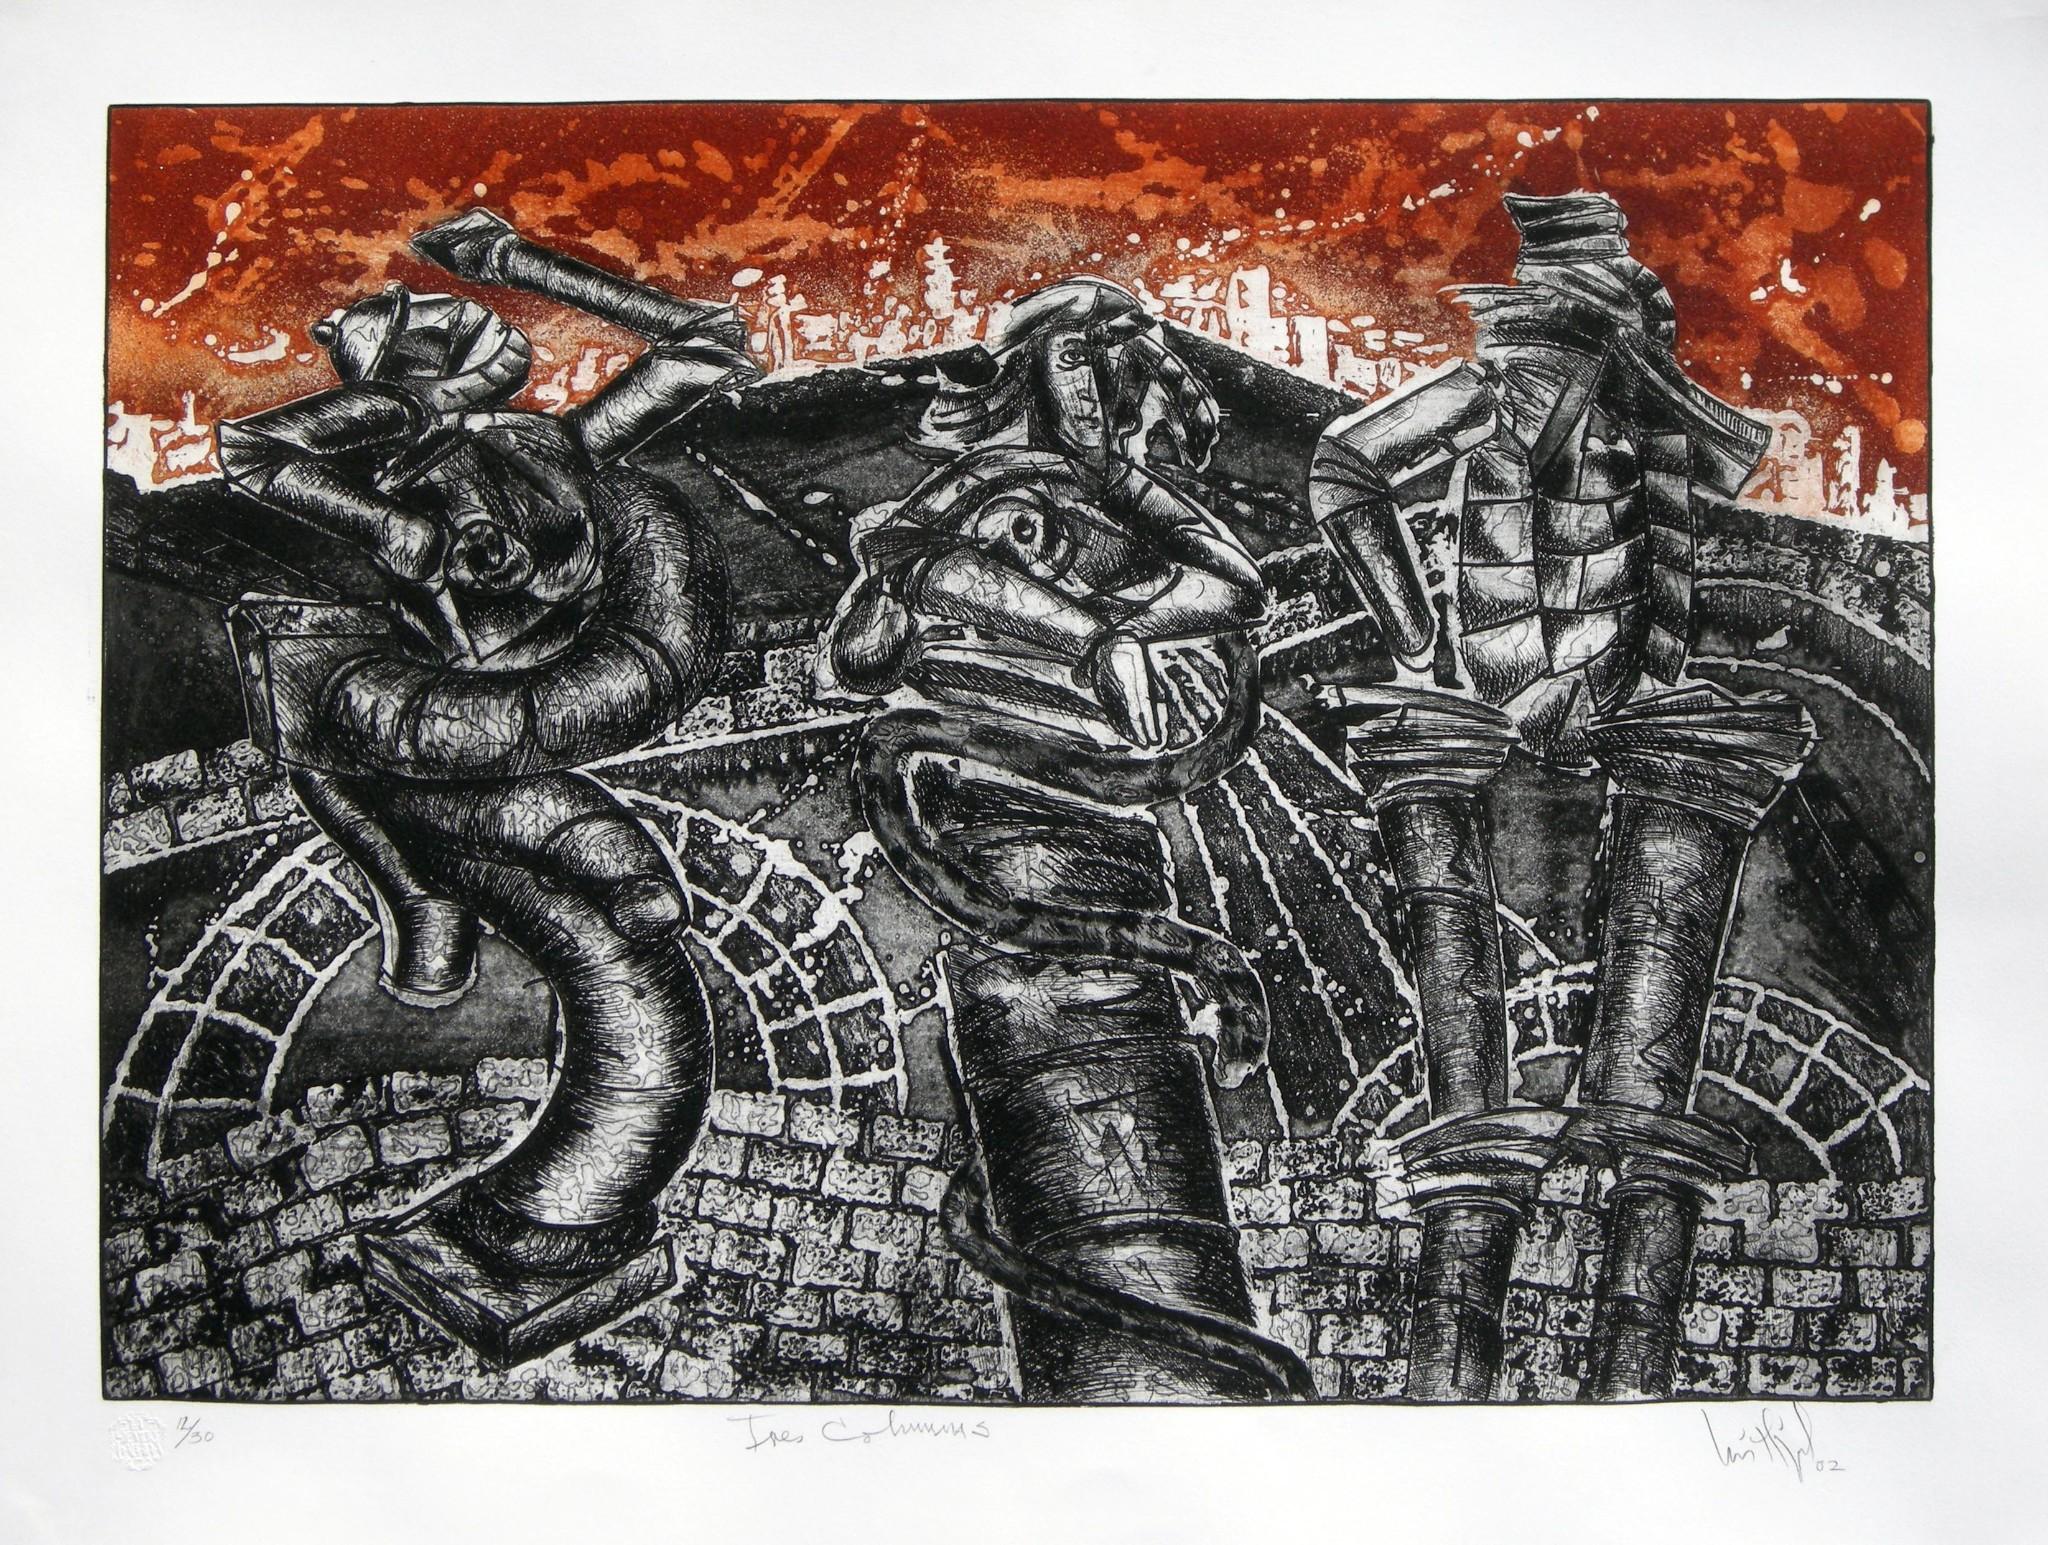 Cuban signed limited edition original art print etching, aquatint, sugarlift - Print by Luis Miguel Valdes 